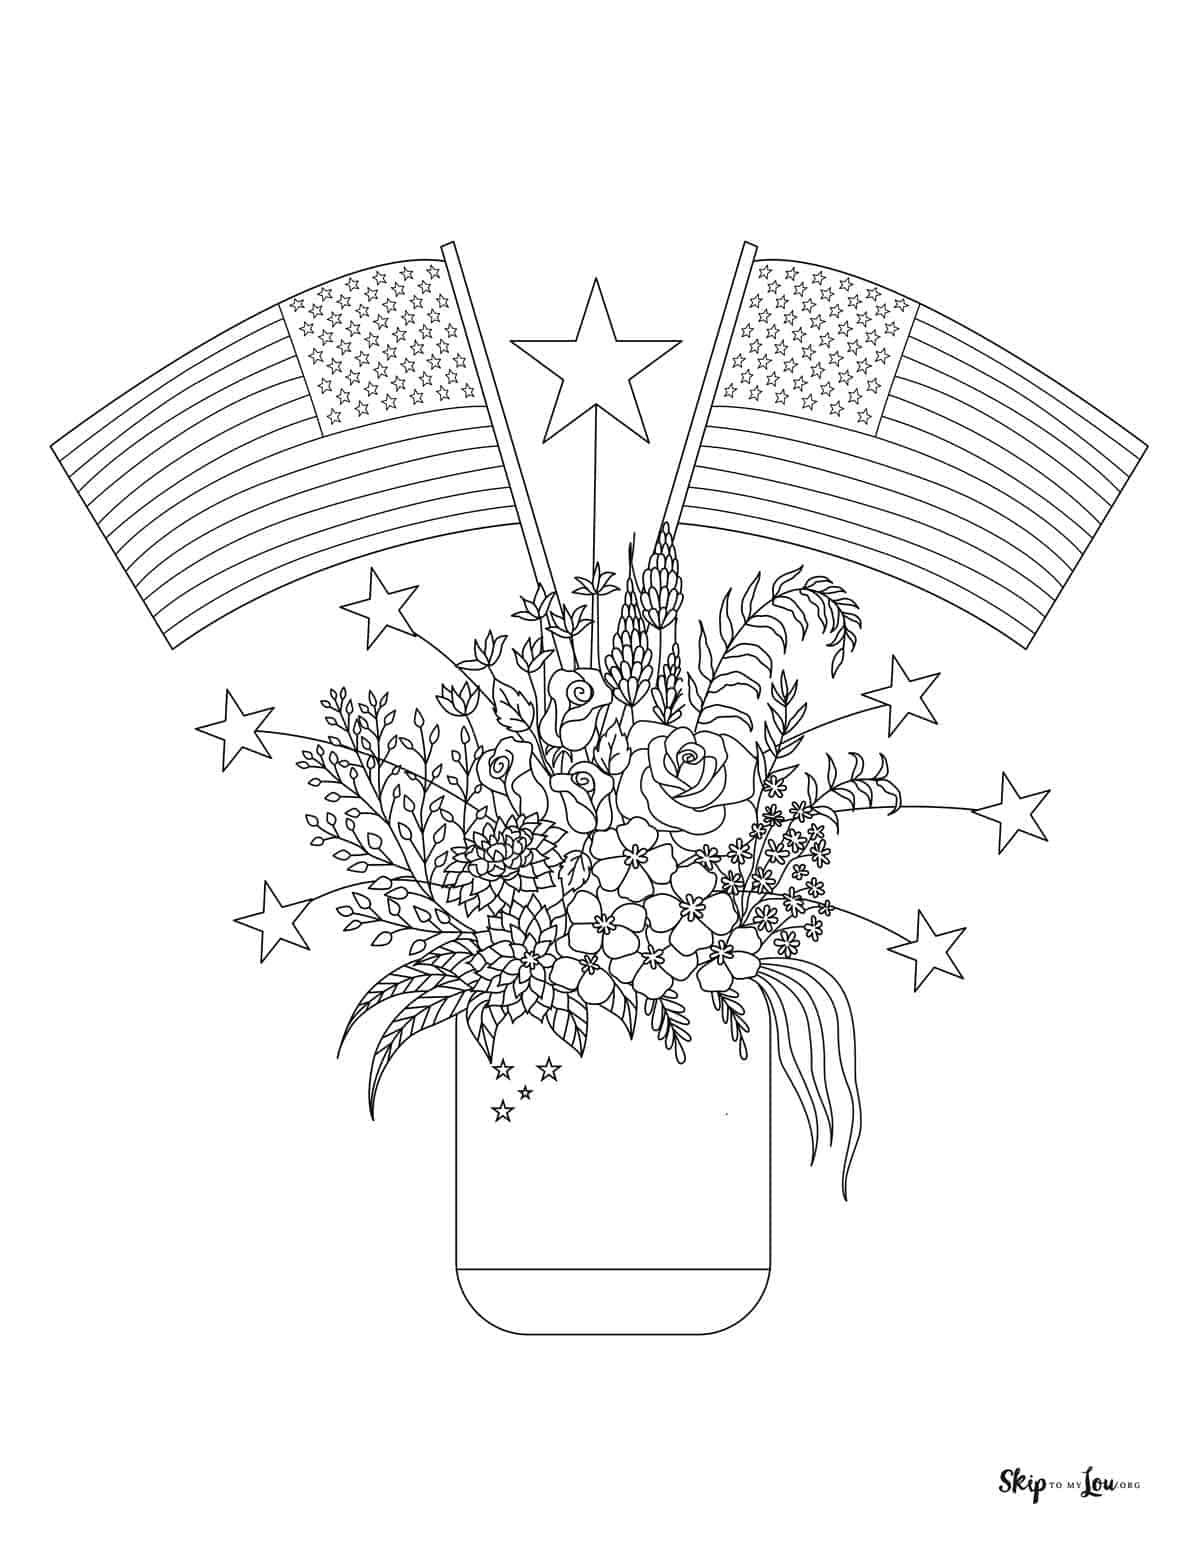 American flag coloring pages skip to my lou